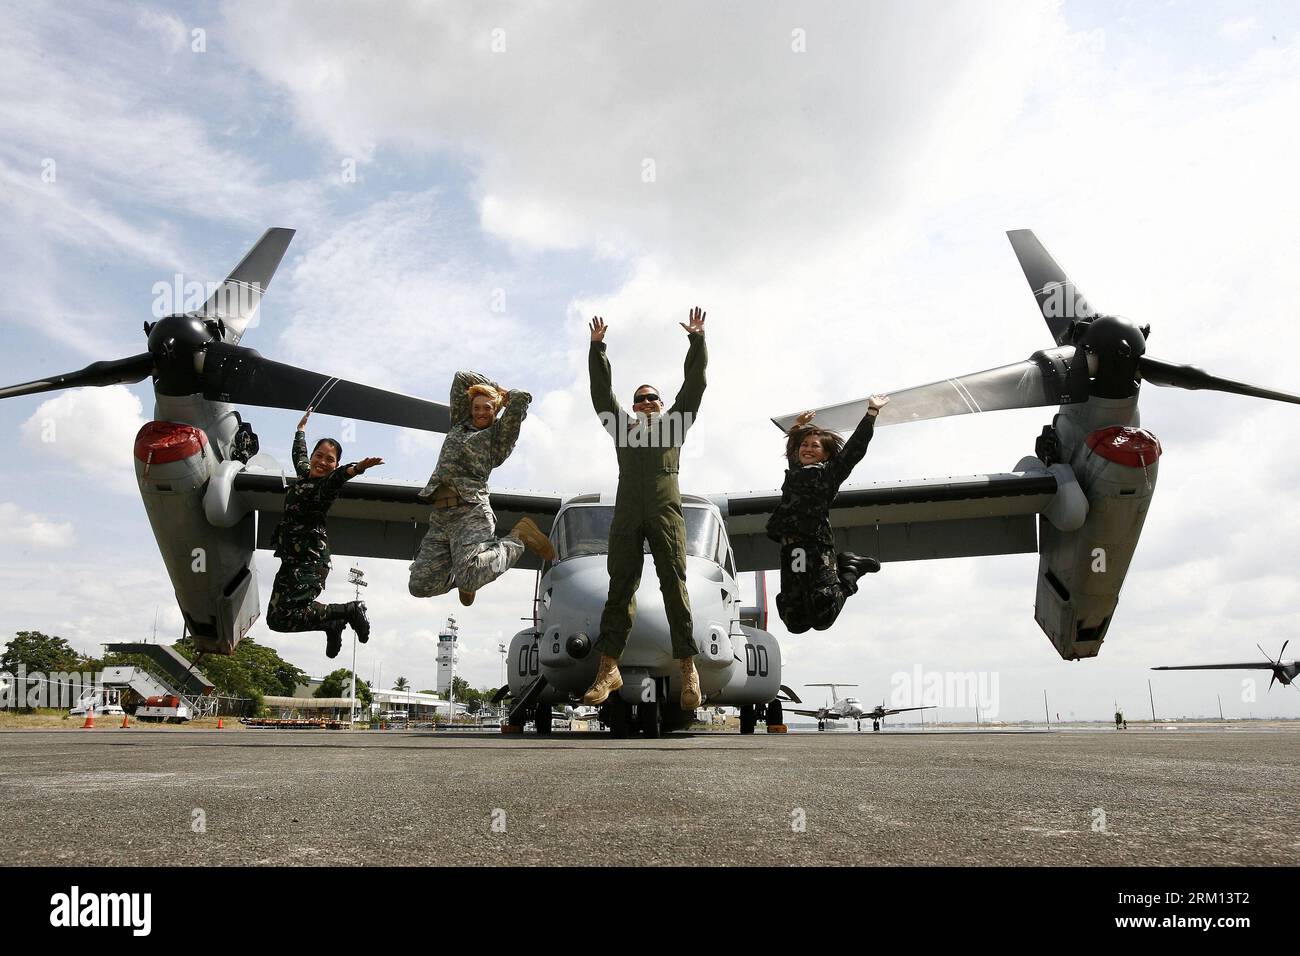 Bildnummer: 59511435  Datum: 13.04.2013  Copyright: imago/Xinhua (130413) -- PAMPANGA, April 13, 2013 (Xinhua) -- American and Filipino soldiers jump in front of the MV-22 Osprey as they share a light moment during an aircraft static display as part of a joint military exercise in Pampanga Province, the Philippines, April 13, 2013. The Philippines and the U.S. held their 29th annual joint military exercise with at least 8,000 American and Filipino soldiers participating in the training. The joint military exercise, more known as Balikatan, which means shoulder-to-shoulder in Filipino, is held Stock Photo